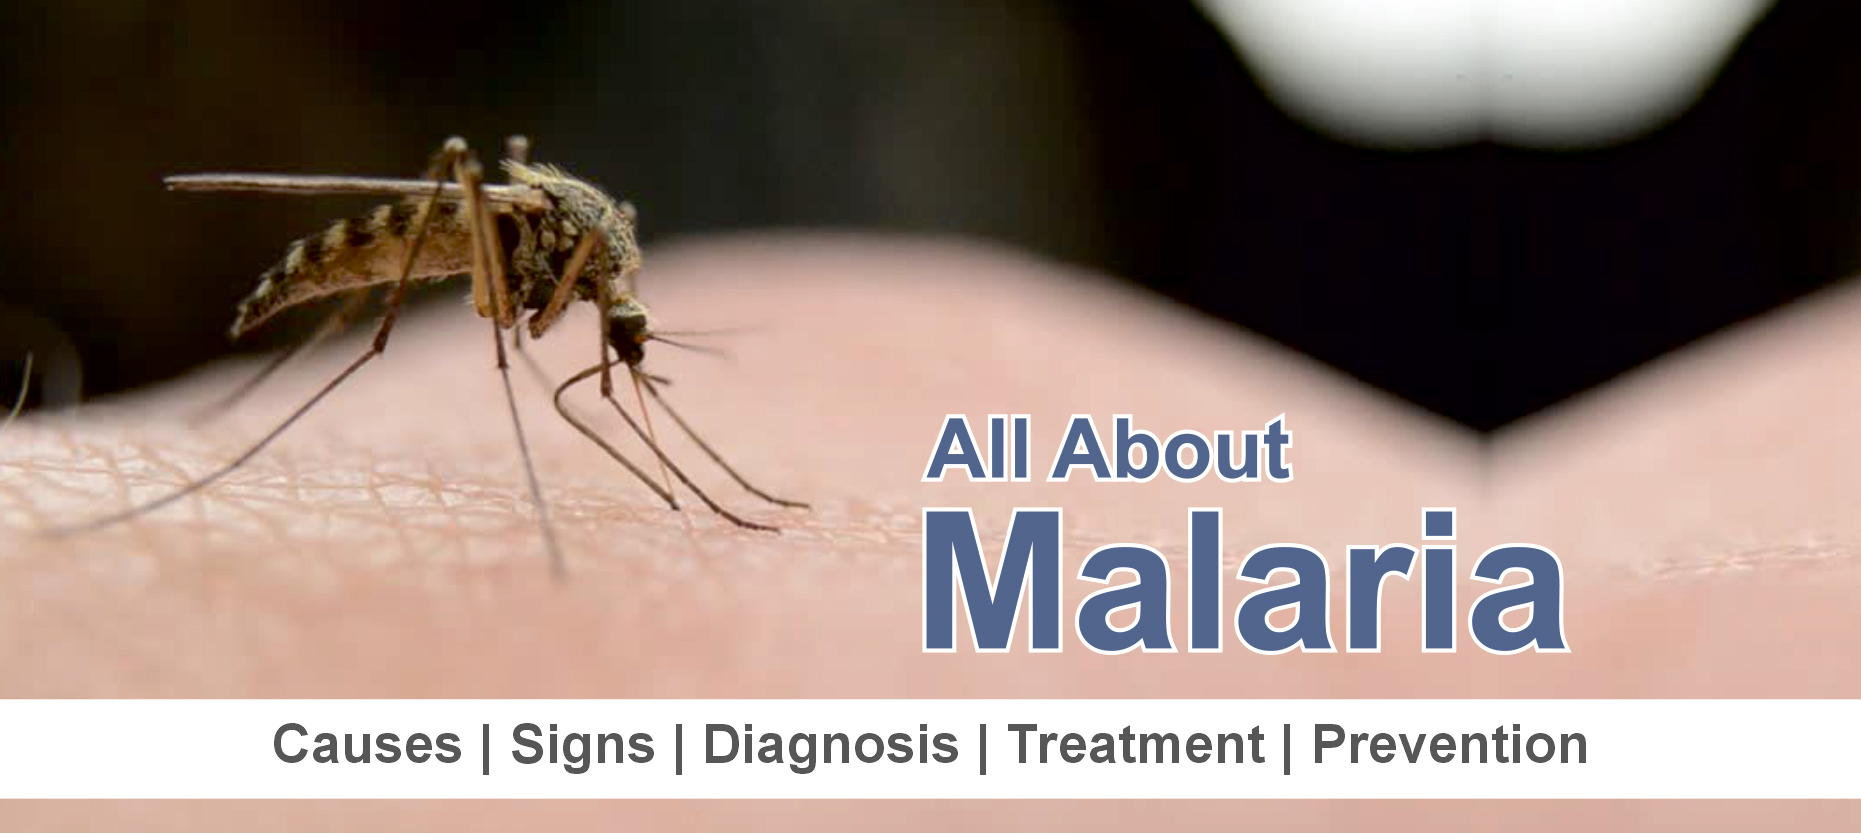 Malaria: Causes, Signs, Diagnosis, Treatment, and Prevention